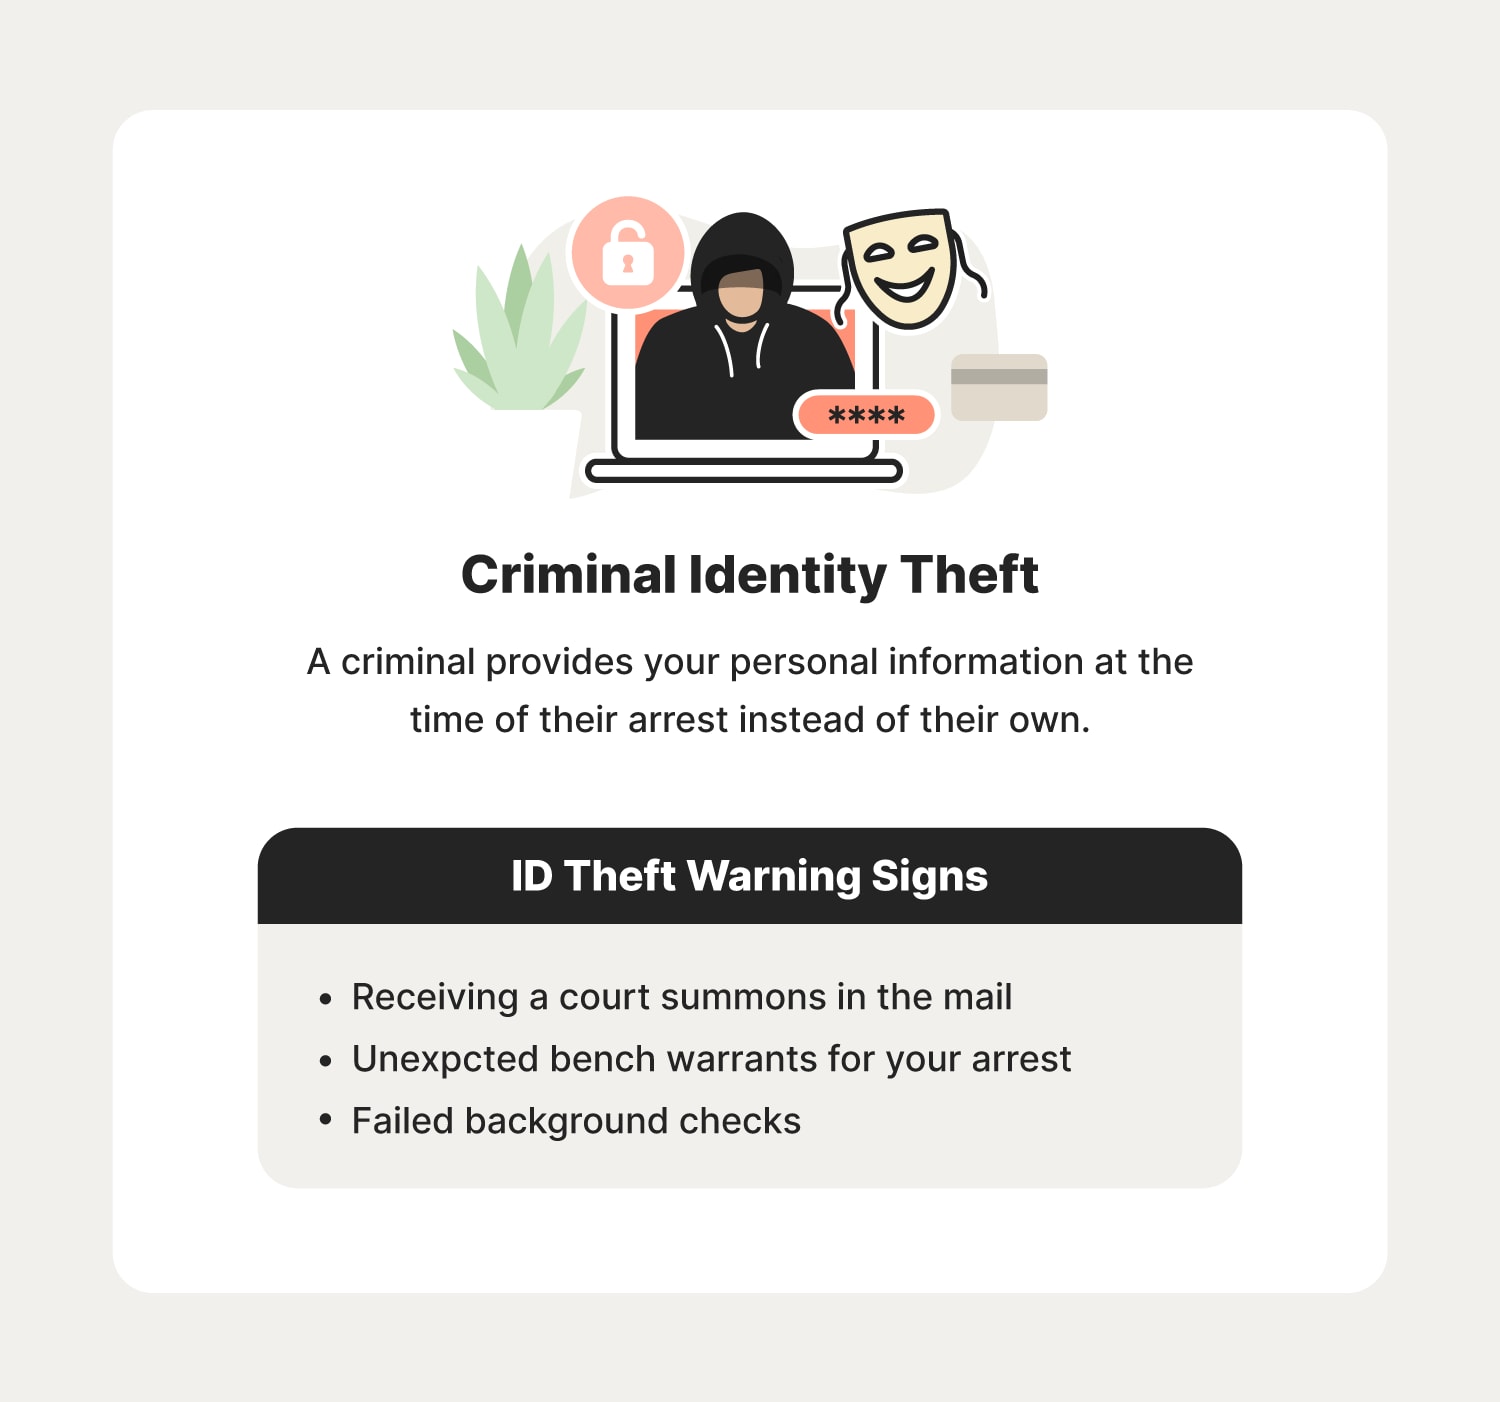 Illustrated chart with information about criminal identity theft and some warning signs to look out for.